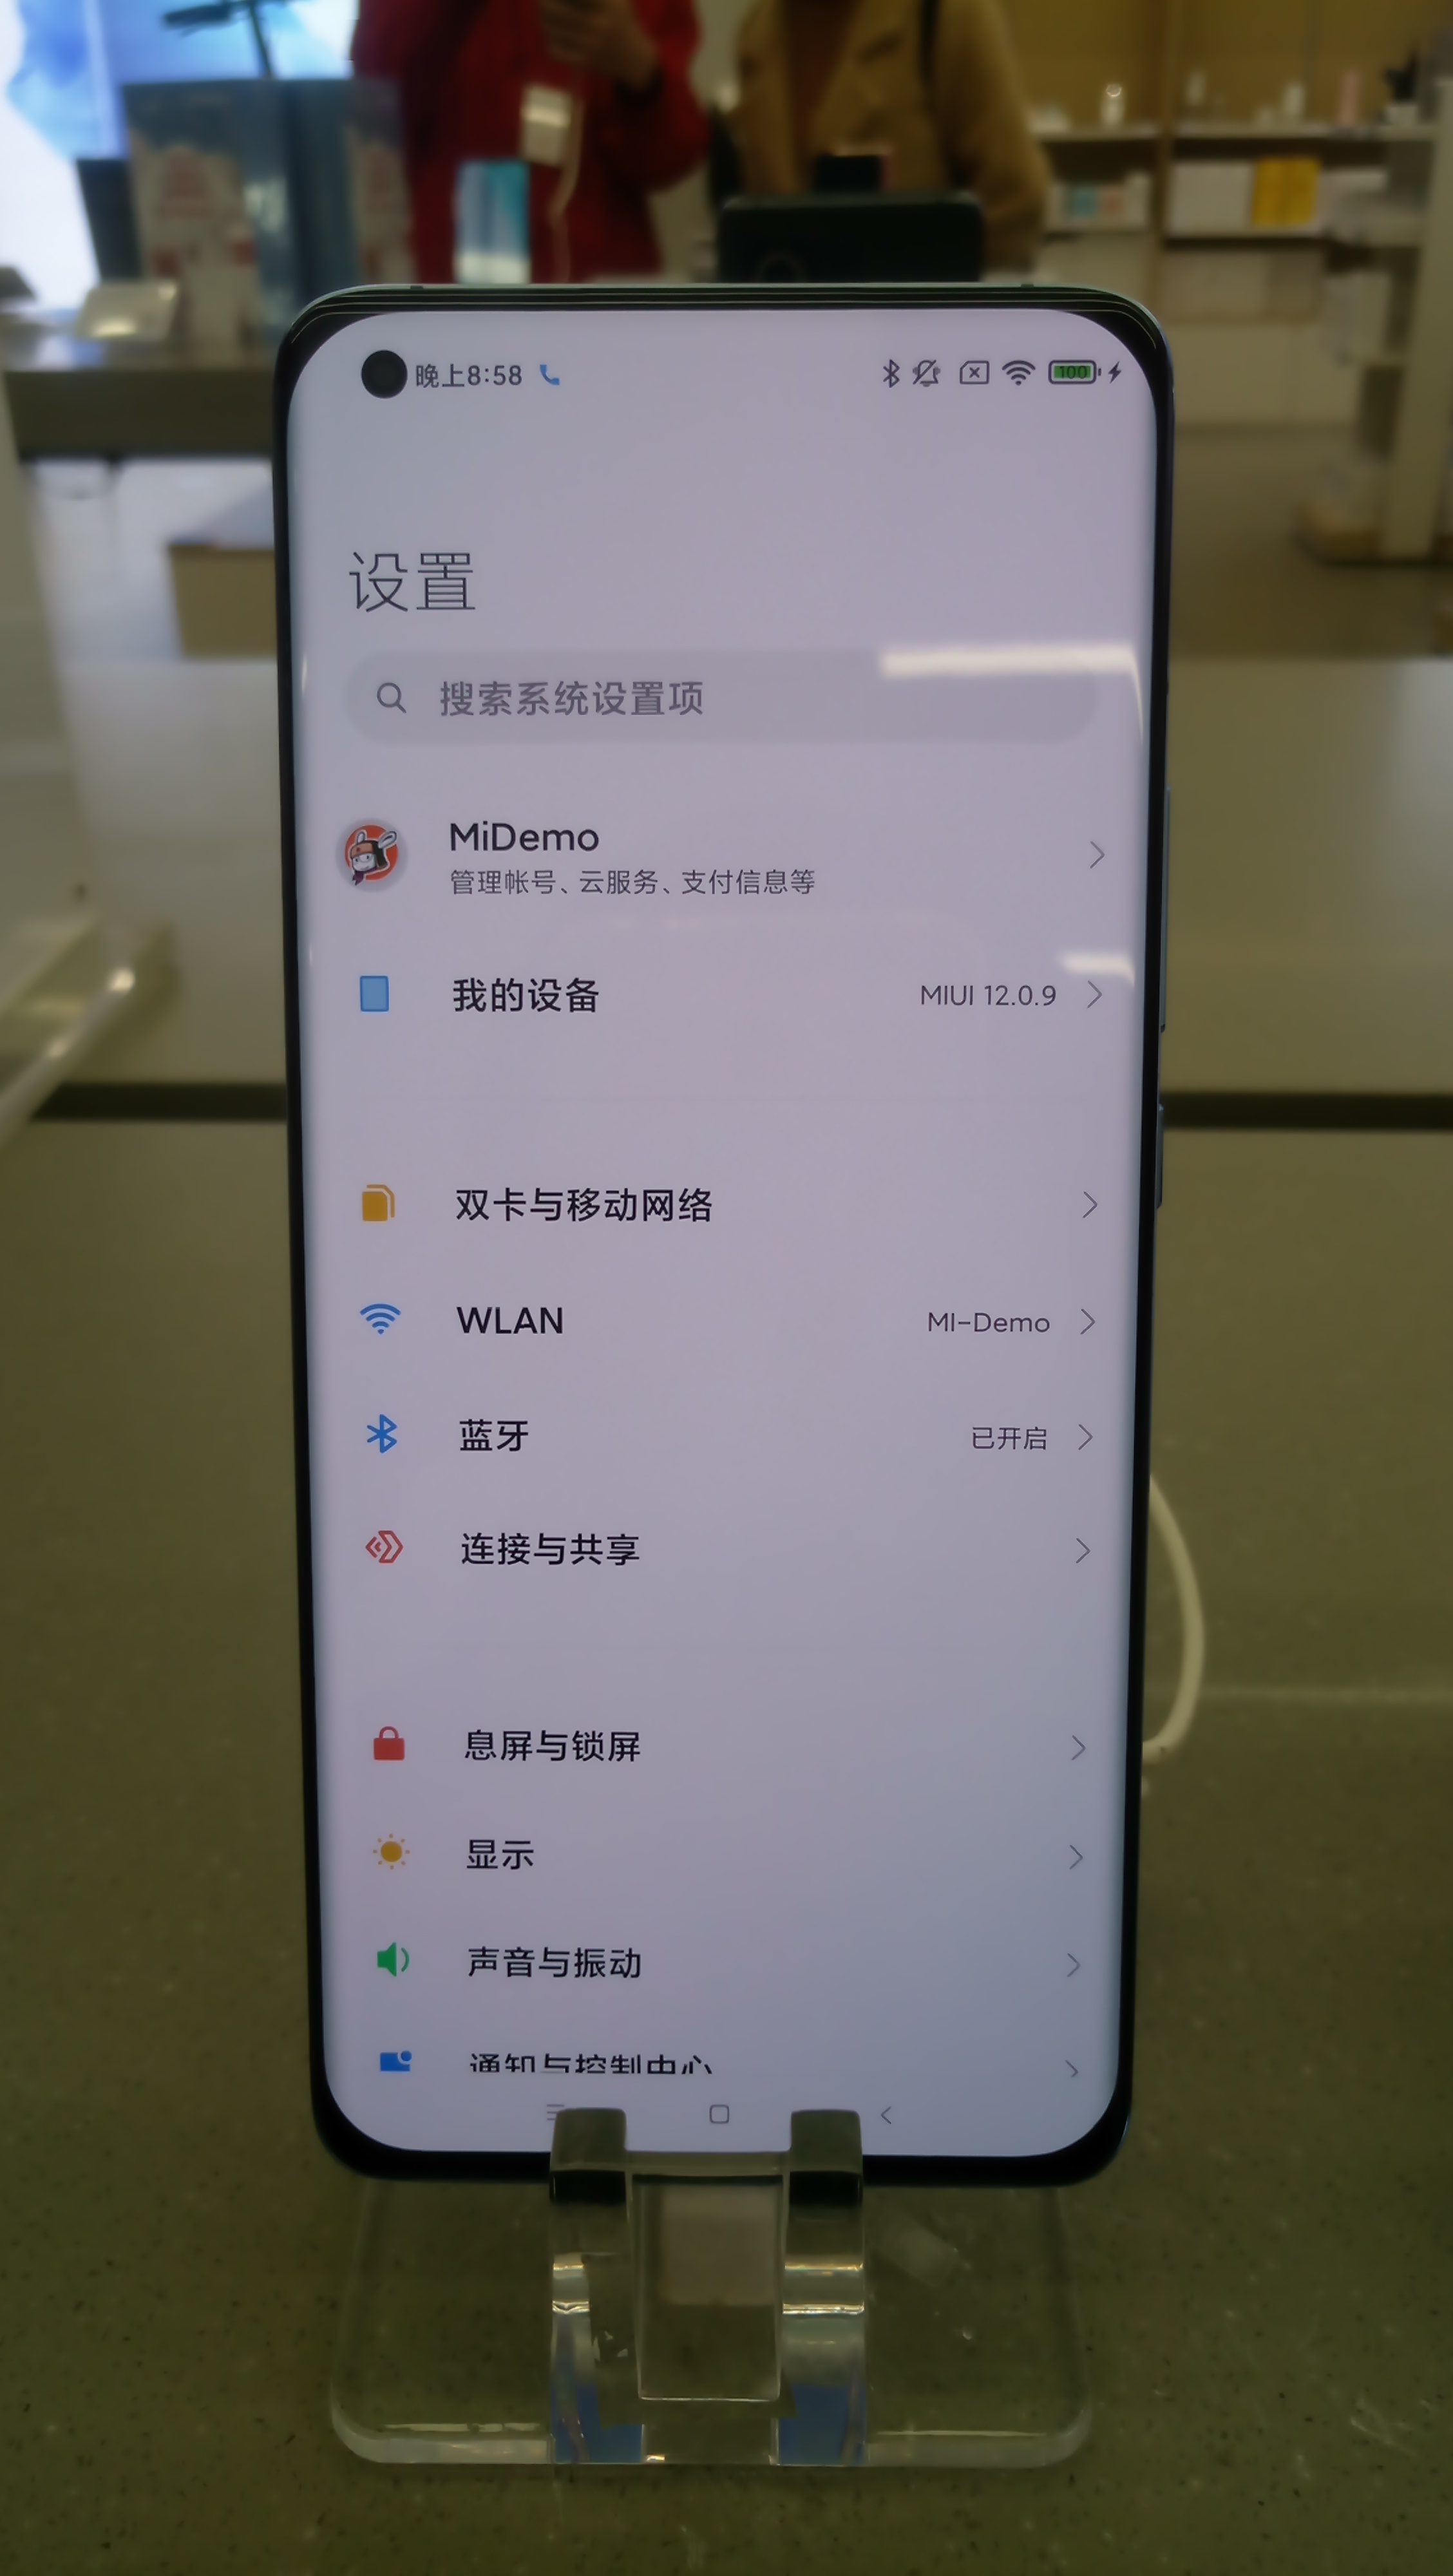 Xiaomi 11T Pro review: test features, photos and price - GizChina.it